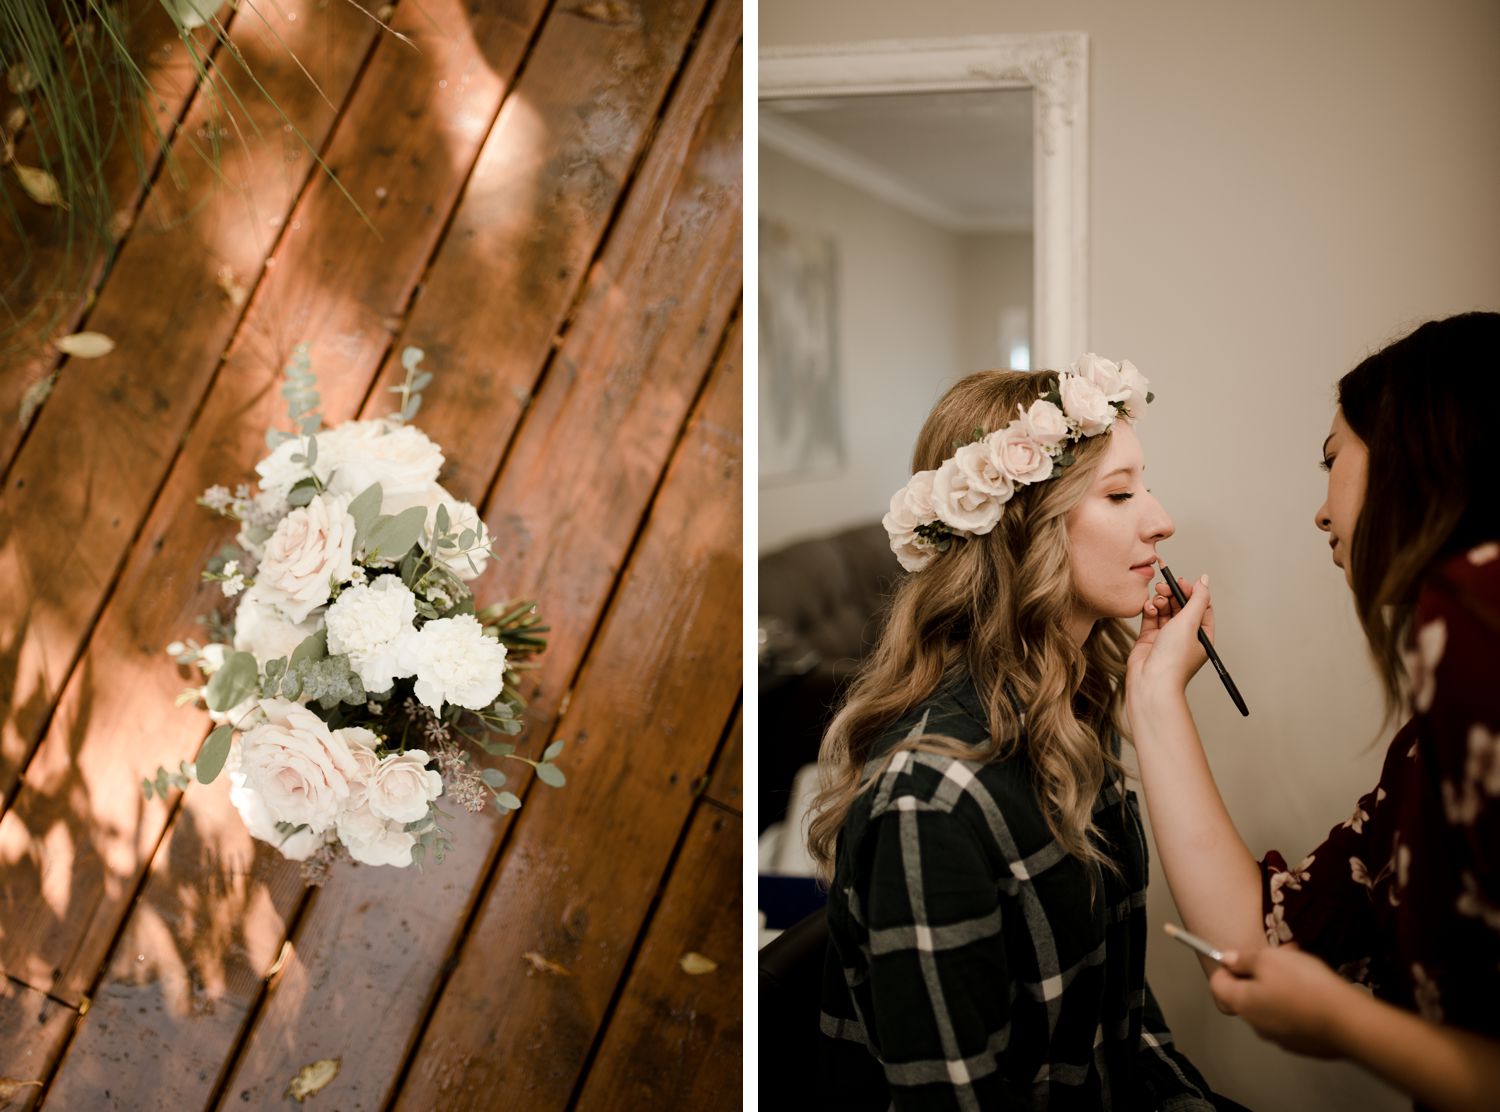 Ashgrove Acres Wedding in Winnipeg Manitoba, bridal flower crowns and fresh florals, photographed by Vanessa Renae Photography, a Winnipeg and Kenora wedding photographer